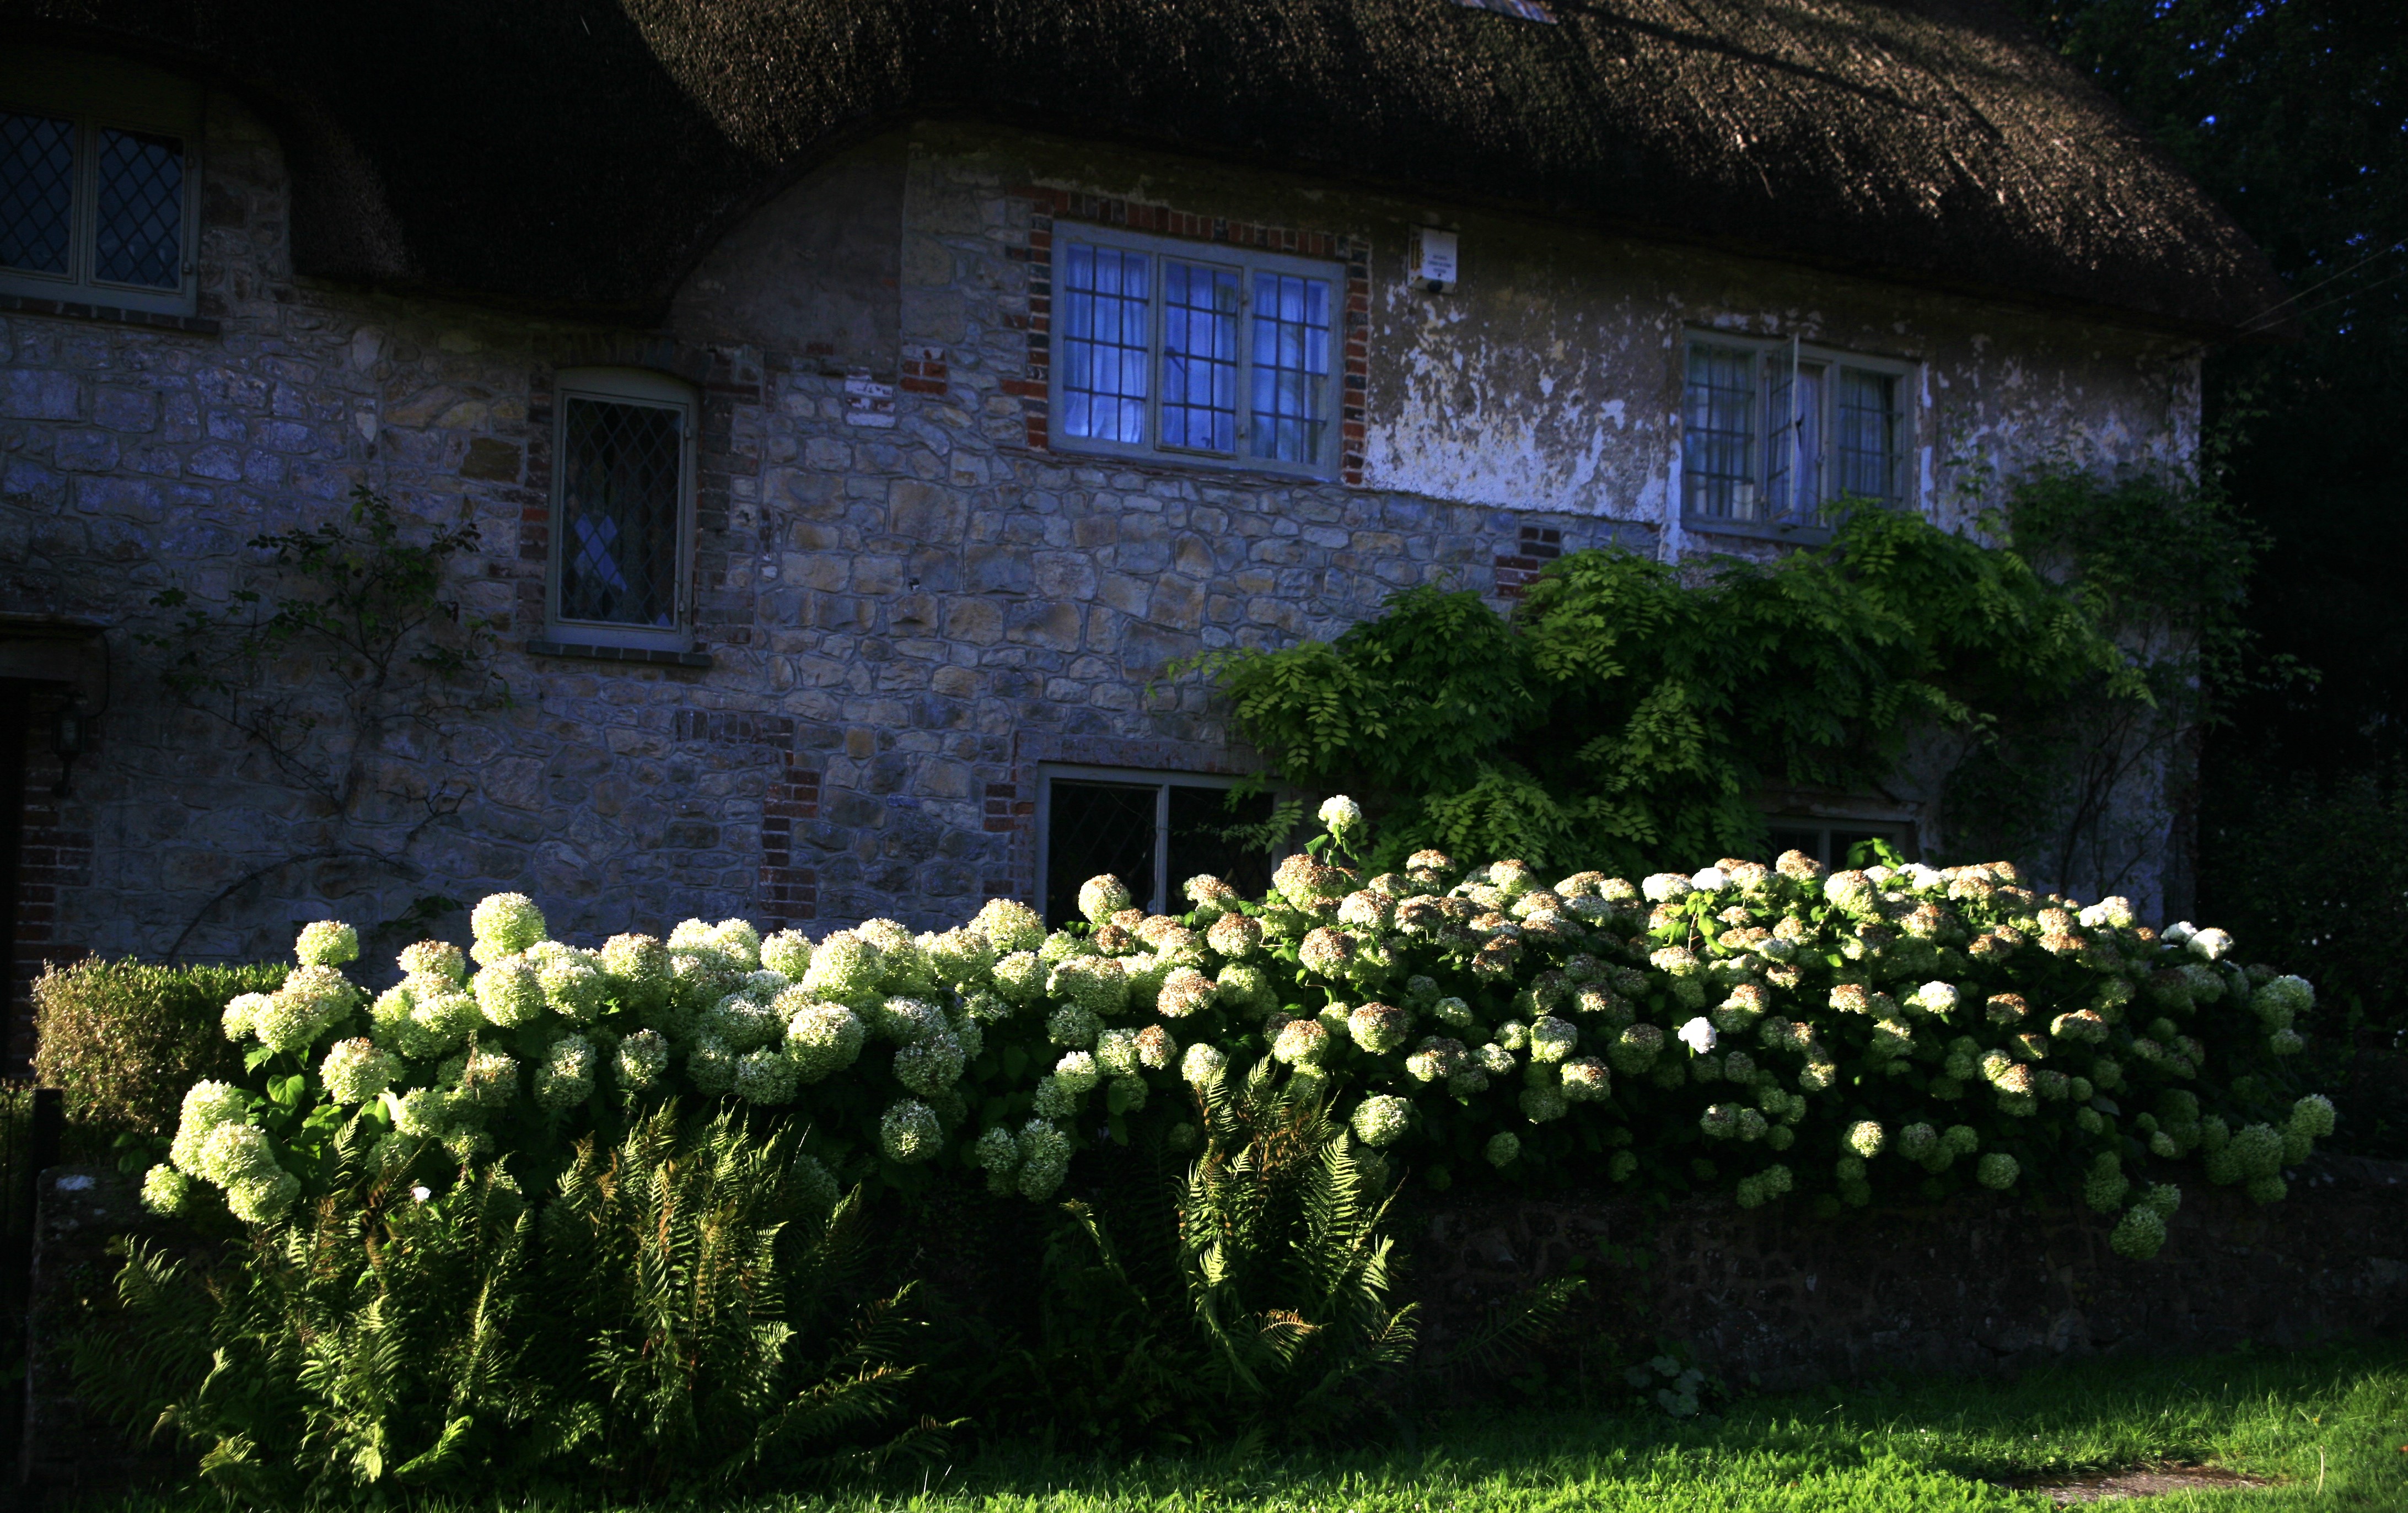 Pale green hydrangeas growing in the foreground in front of a stone English cottage